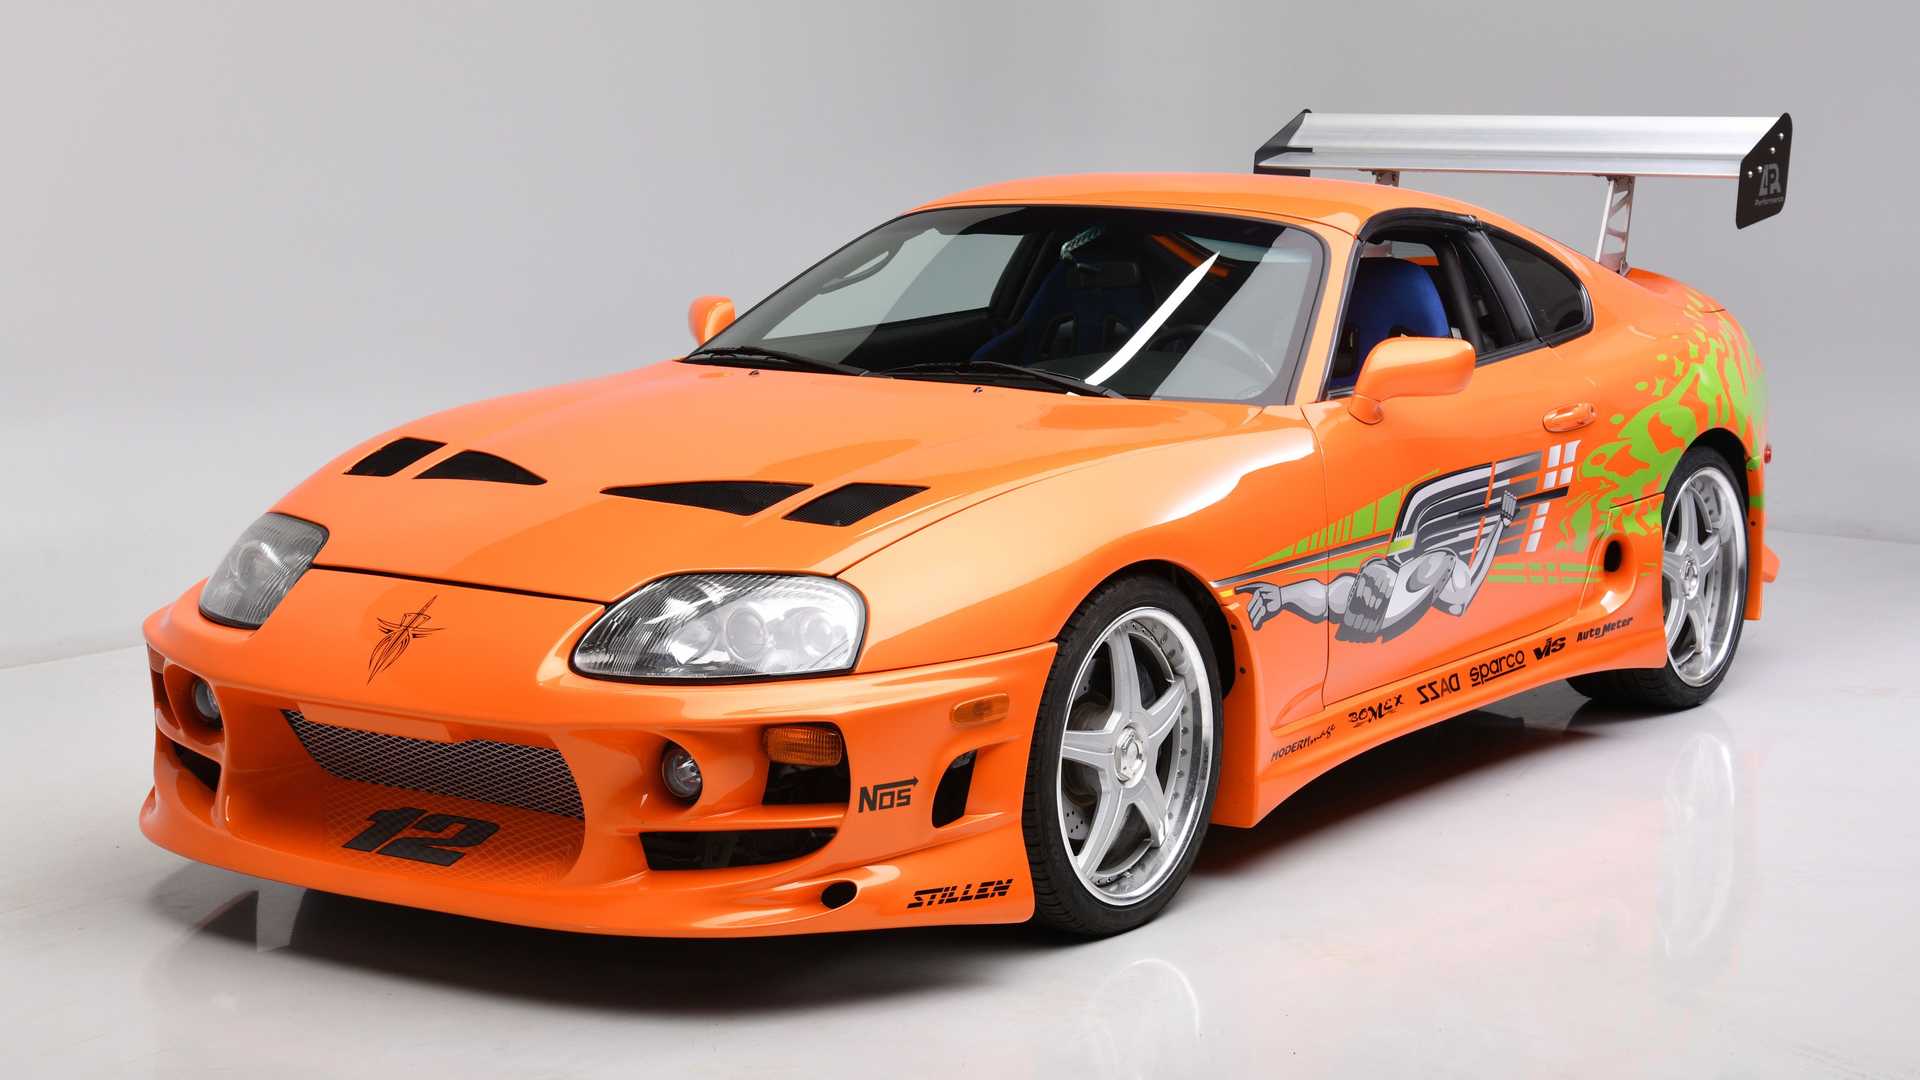 TopGear | Toyota Supra Mk4 'Fast & Furious' is going up for auction